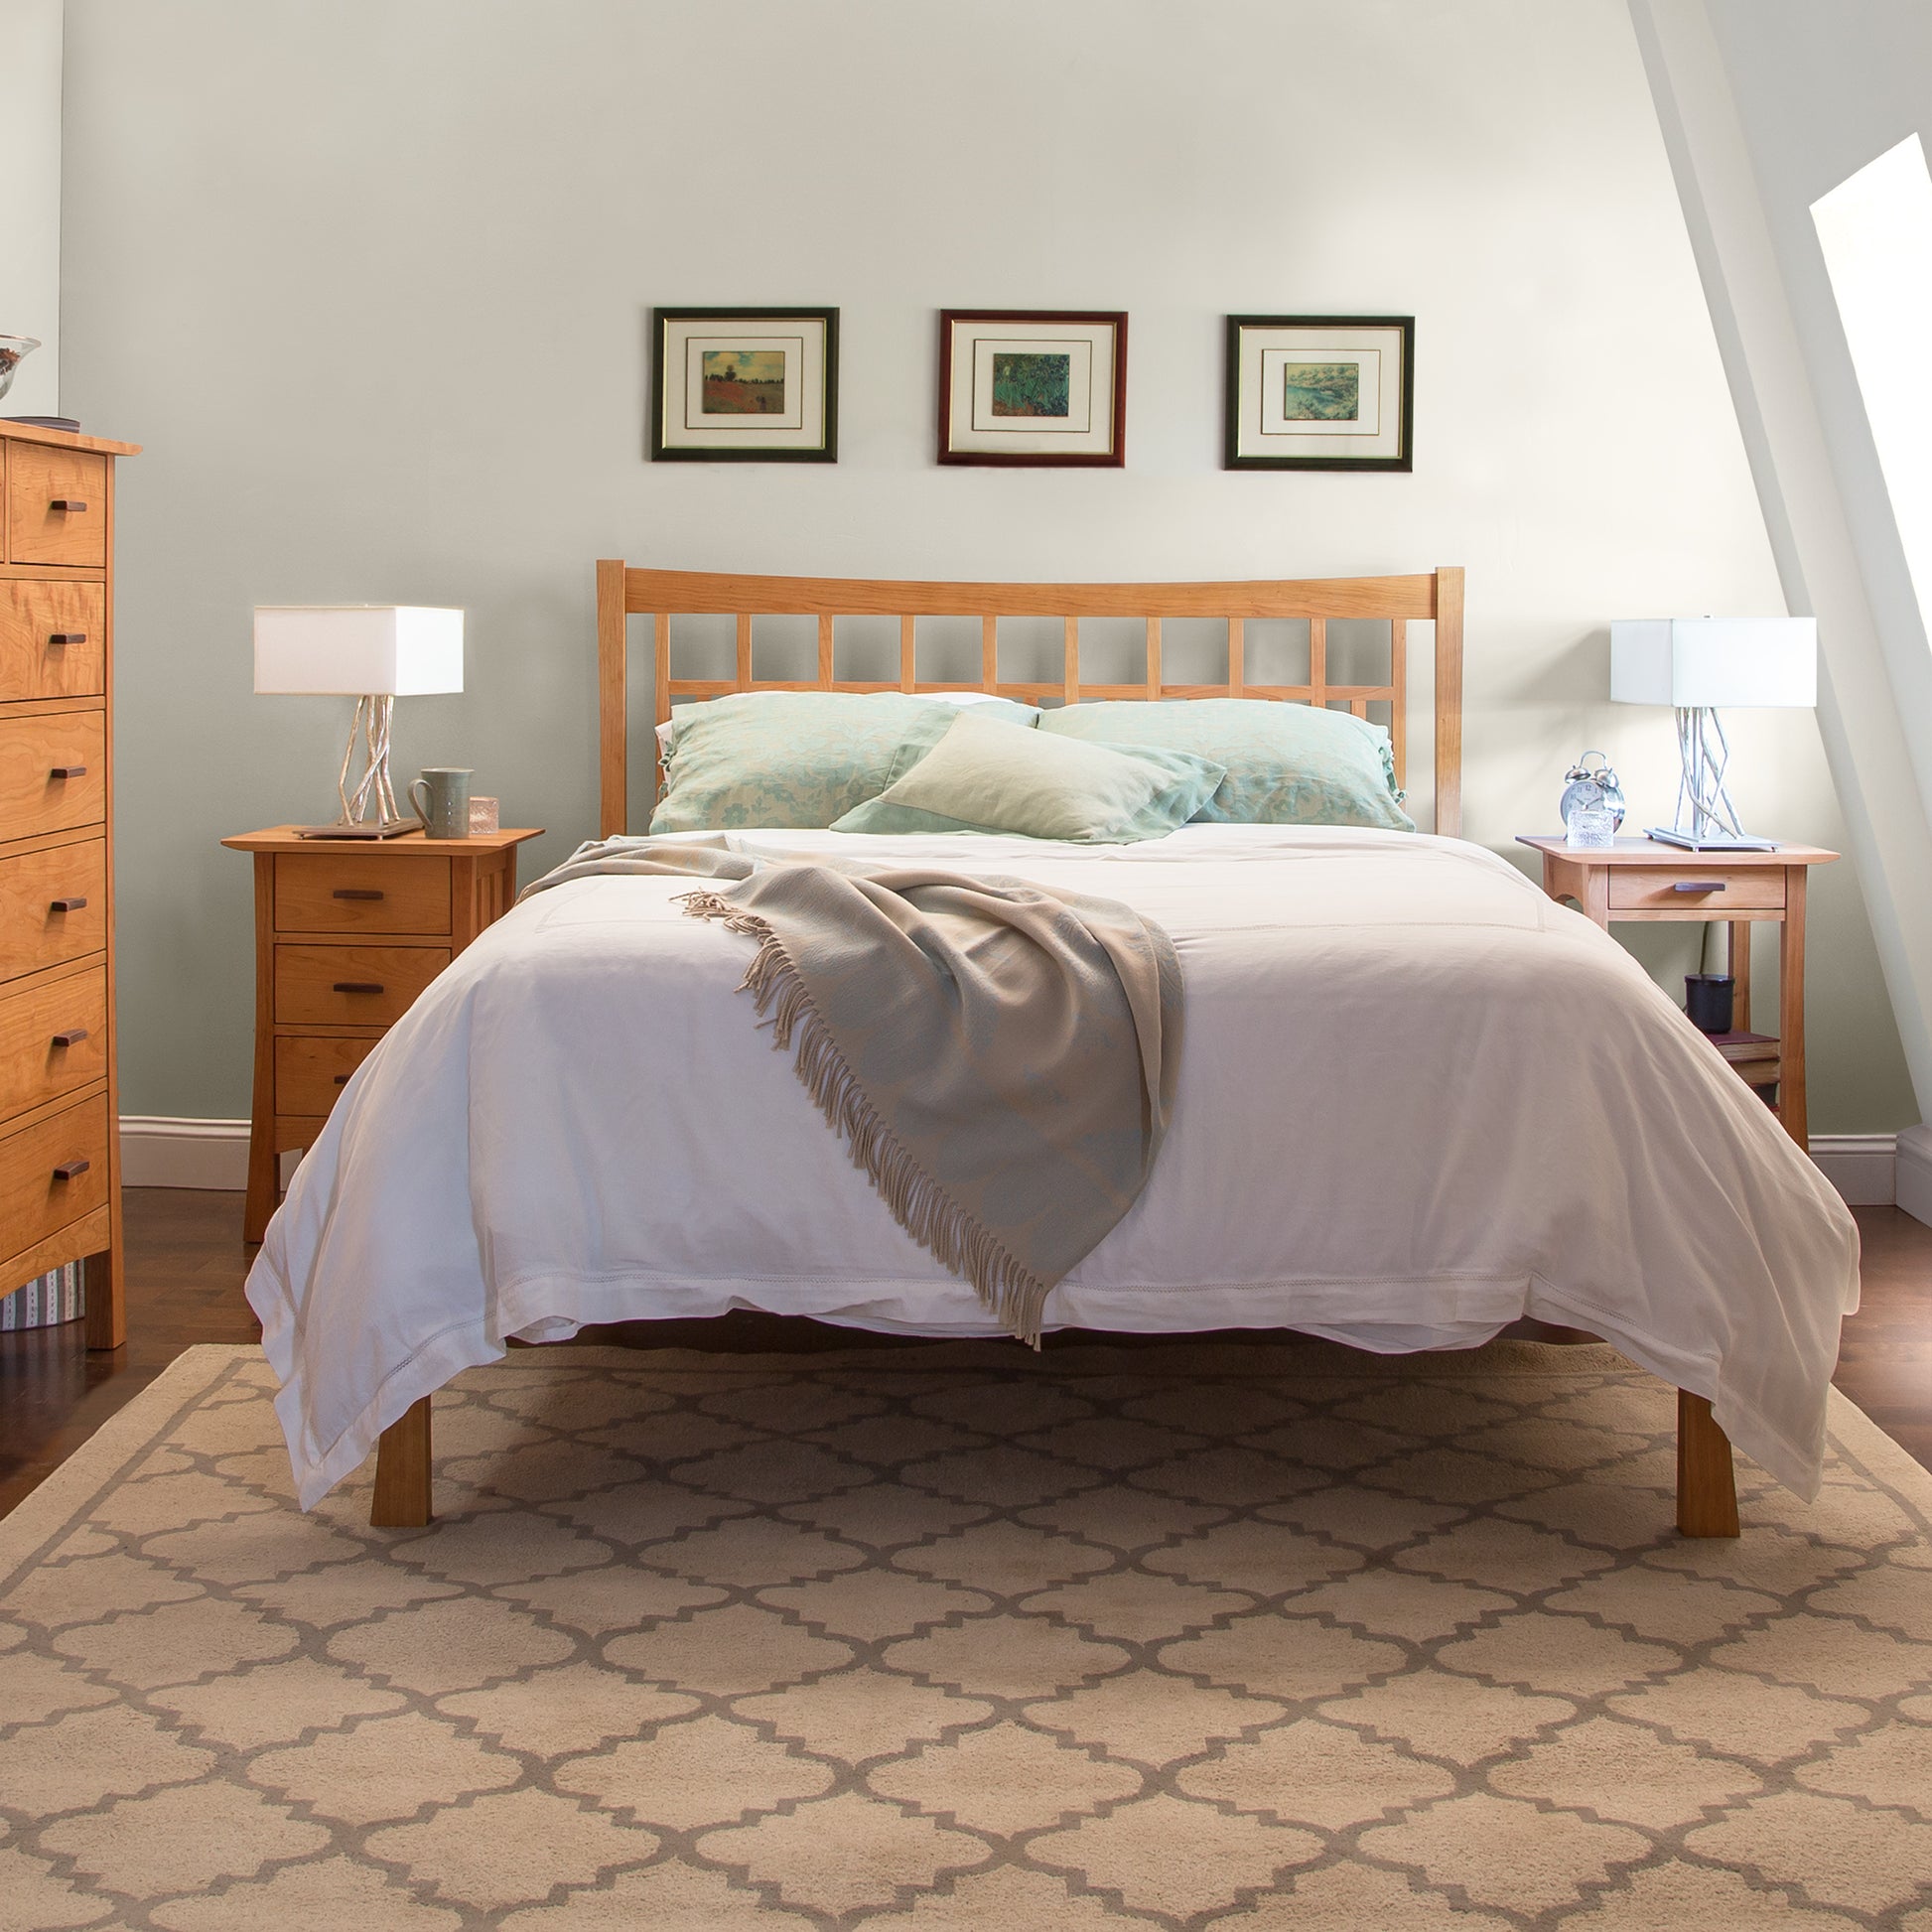 A neatly made solid wood bed from the Vermont Furniture Designs Contemporary Craftsman Low Footboard Bed collection with white bedding and a beige throw blanket in a room with angled walls, two bedside tables with lamps, and framed